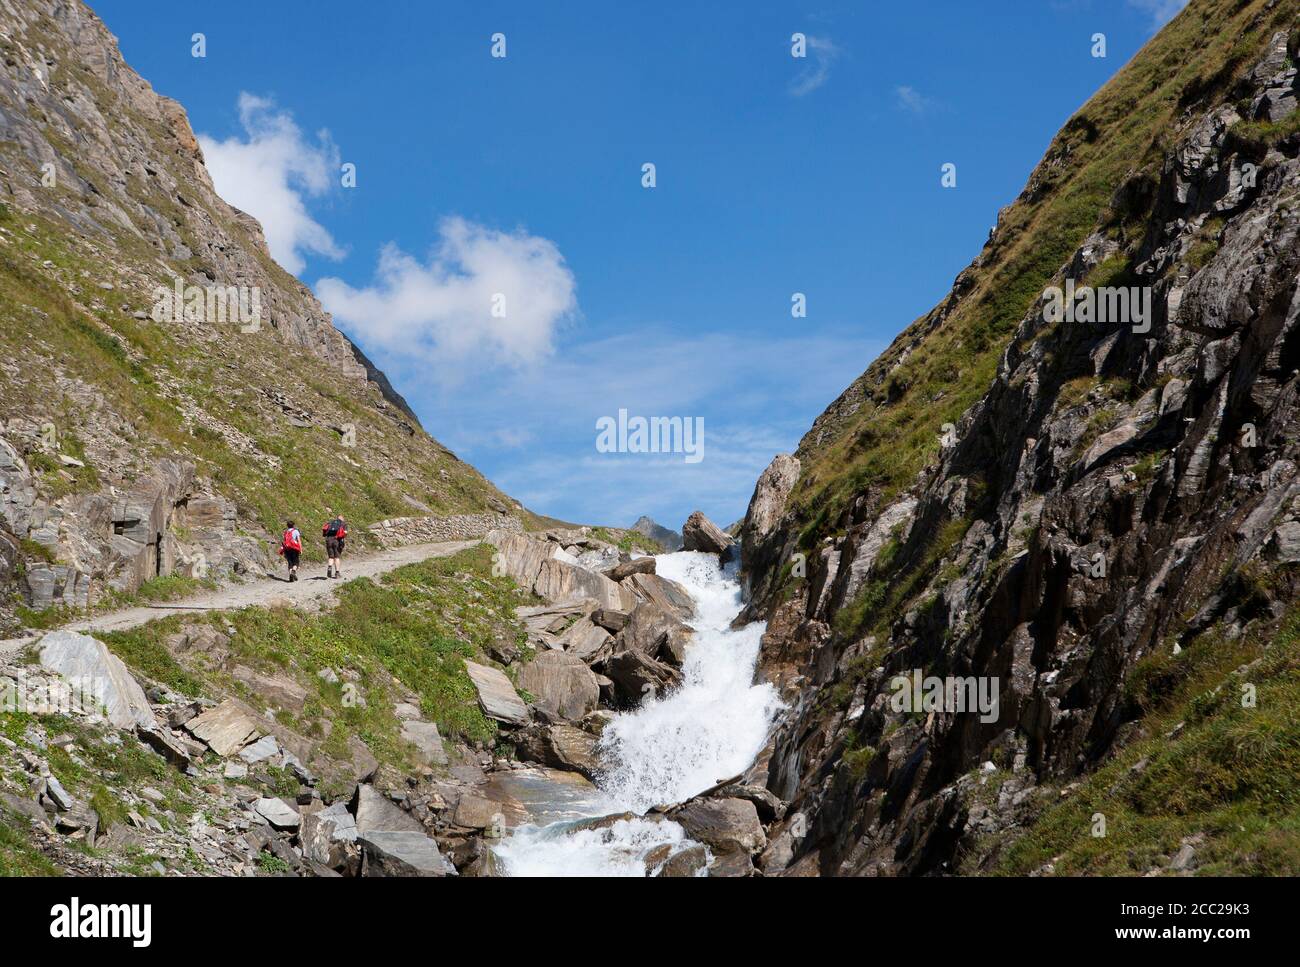 Italy, View of Pfunderer Berge with hikers walking near stream Stock Photo